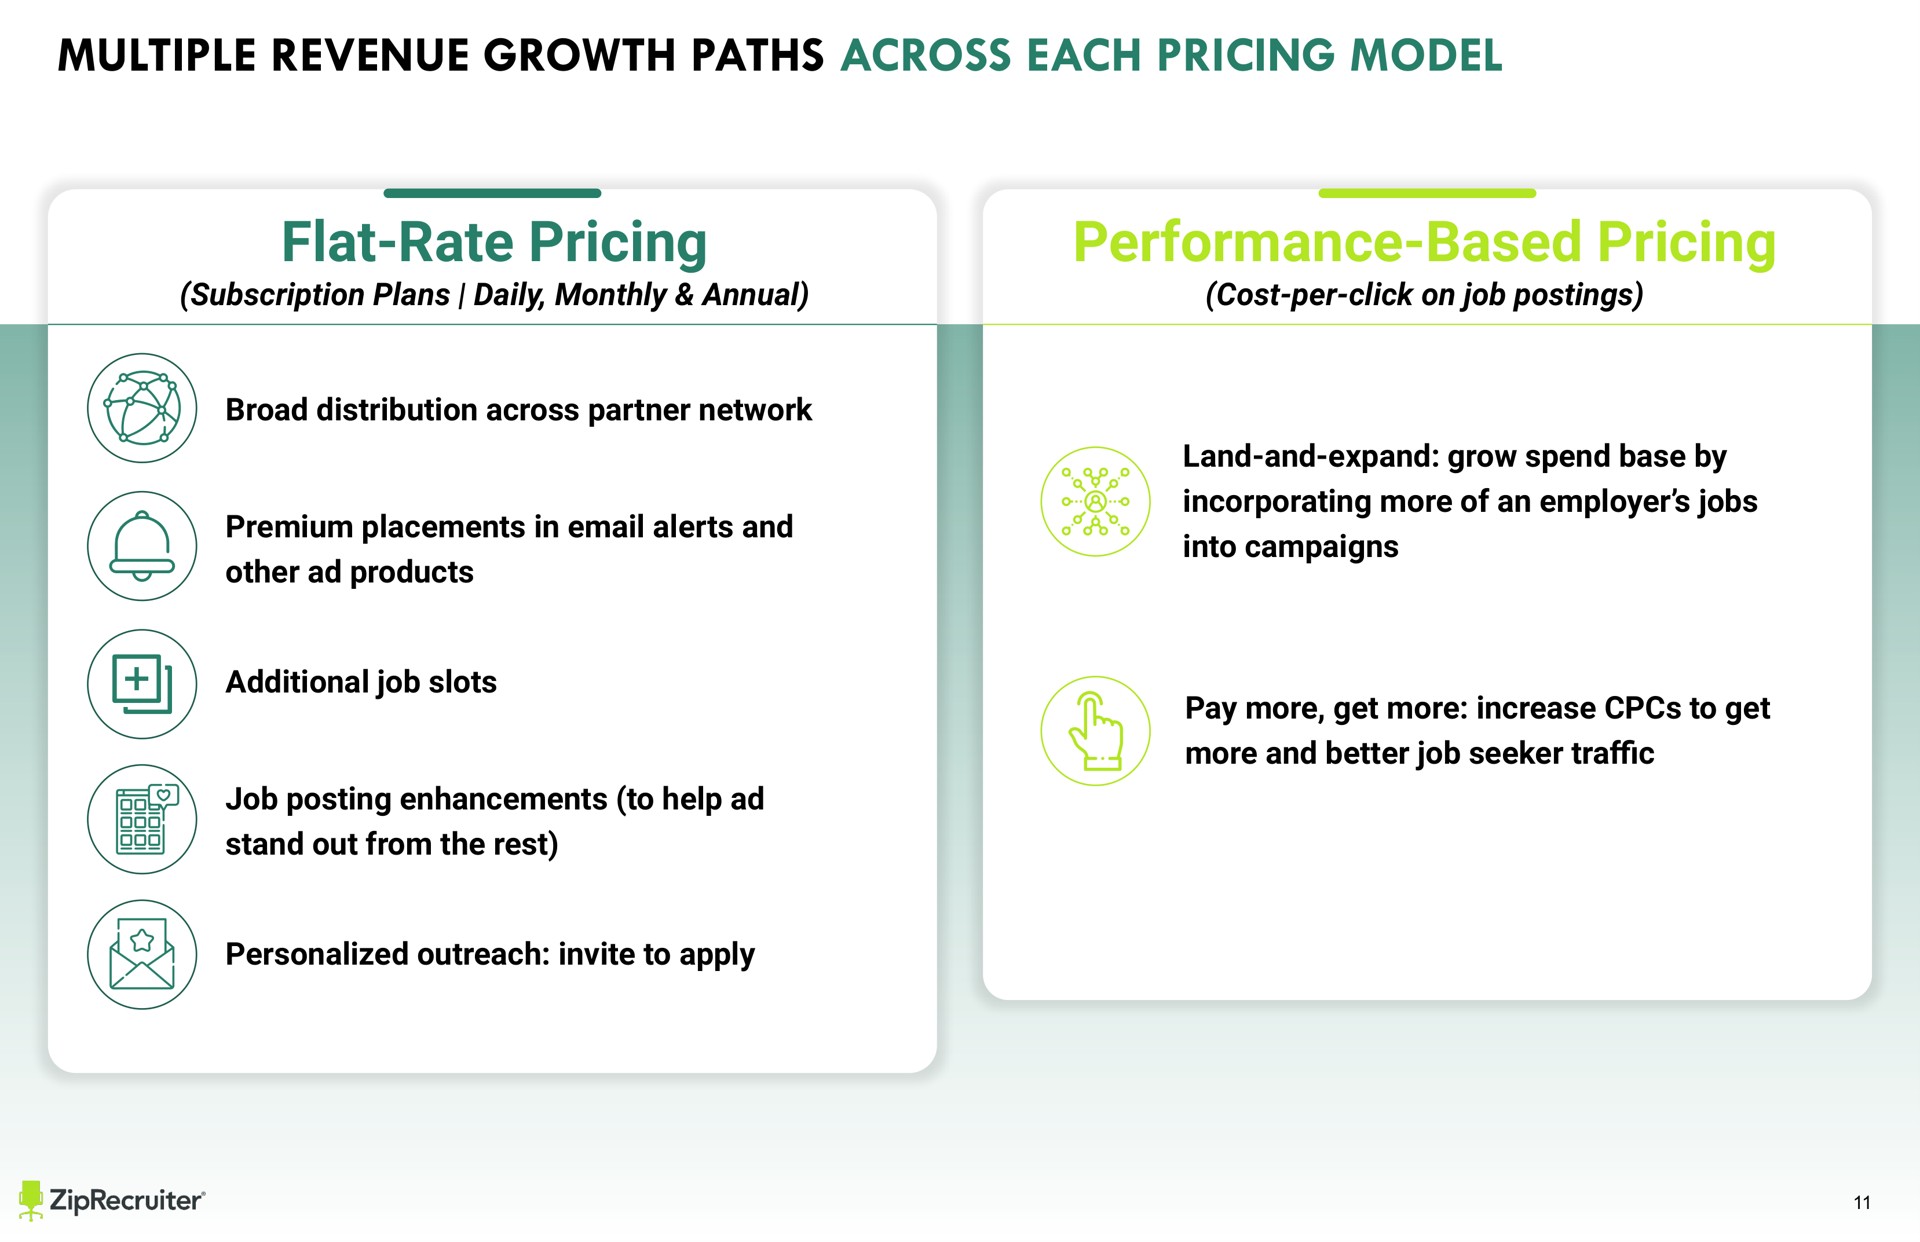 text flat rate pricing subscription plans daily monthly annual performance based pricing cost per click on job postings broad distribution across partner network premium placements in alerts and other products additional job slots job posting enhancements to help stand out from the rest personalized outreach invite to apply land and expand grow spend base by incorporating more of an employer jobs into campaigns pay more get more increase to get more and better job seeker tra keep all text and images other than full slide backgrounds from the sides of the slide to avoid being cut off when printed multiple revenue growth paths each model | ZipRecruiter